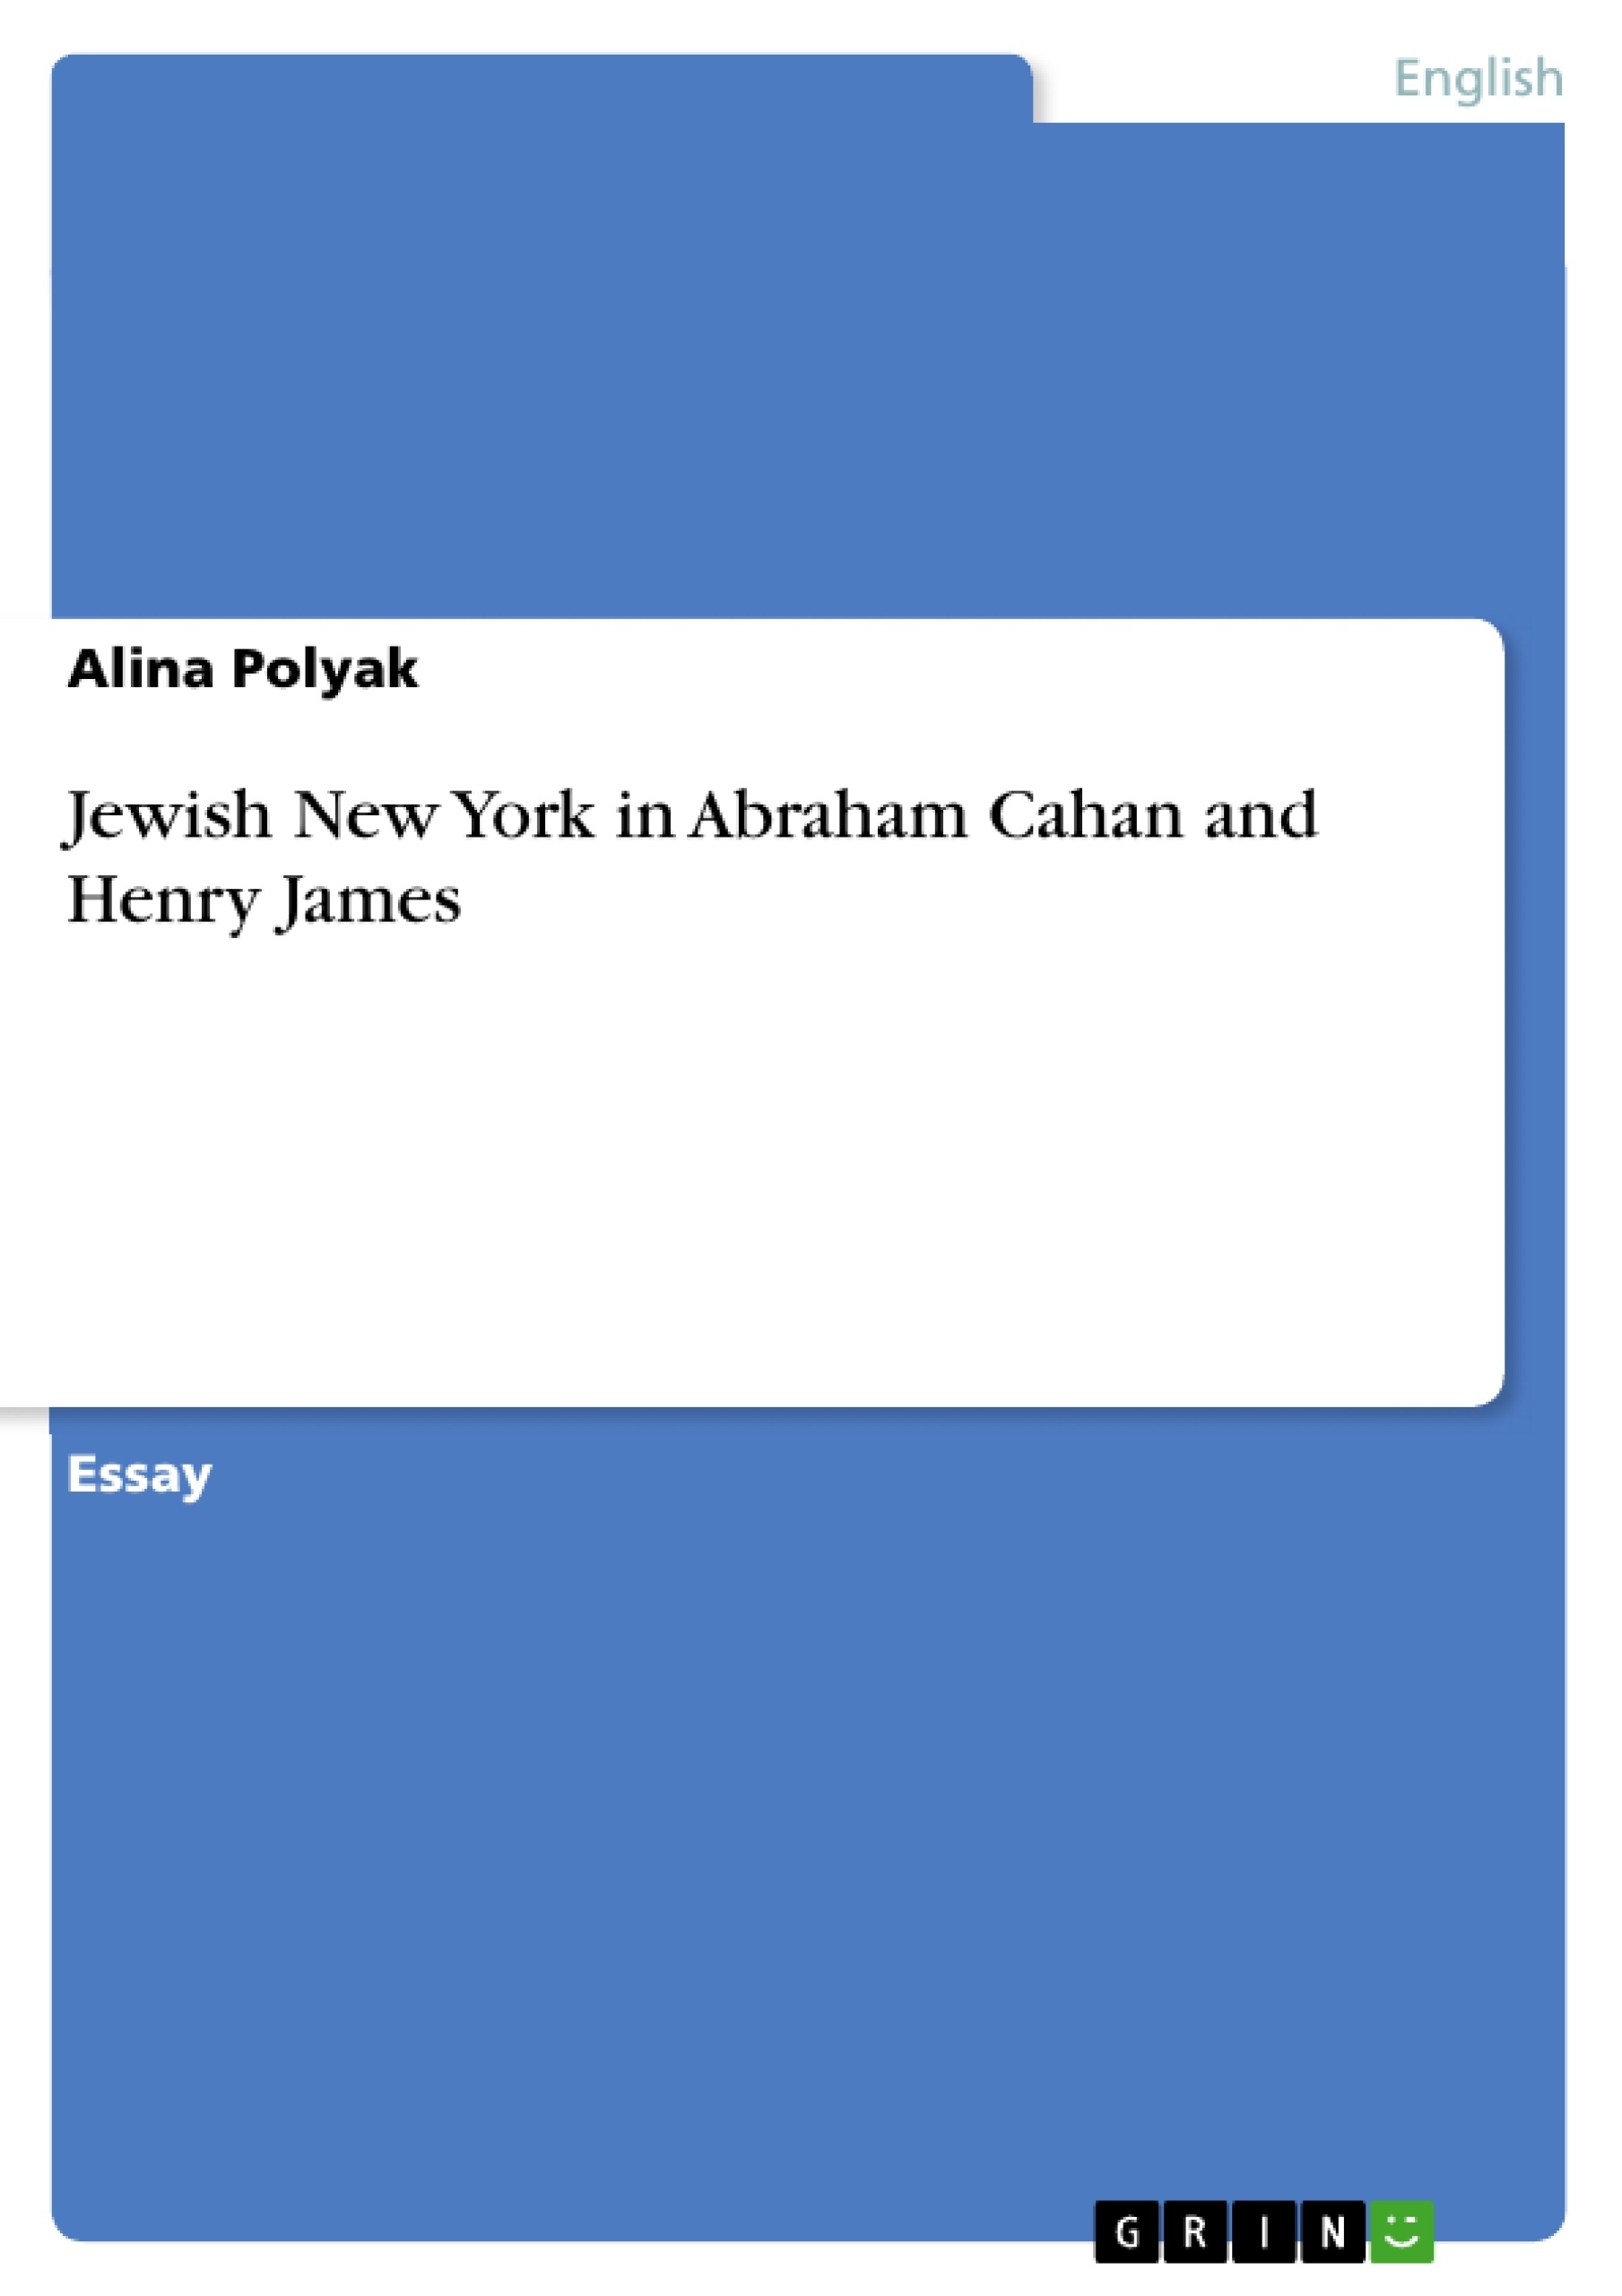 Título: Jewish New York in Abraham Cahan and Henry James